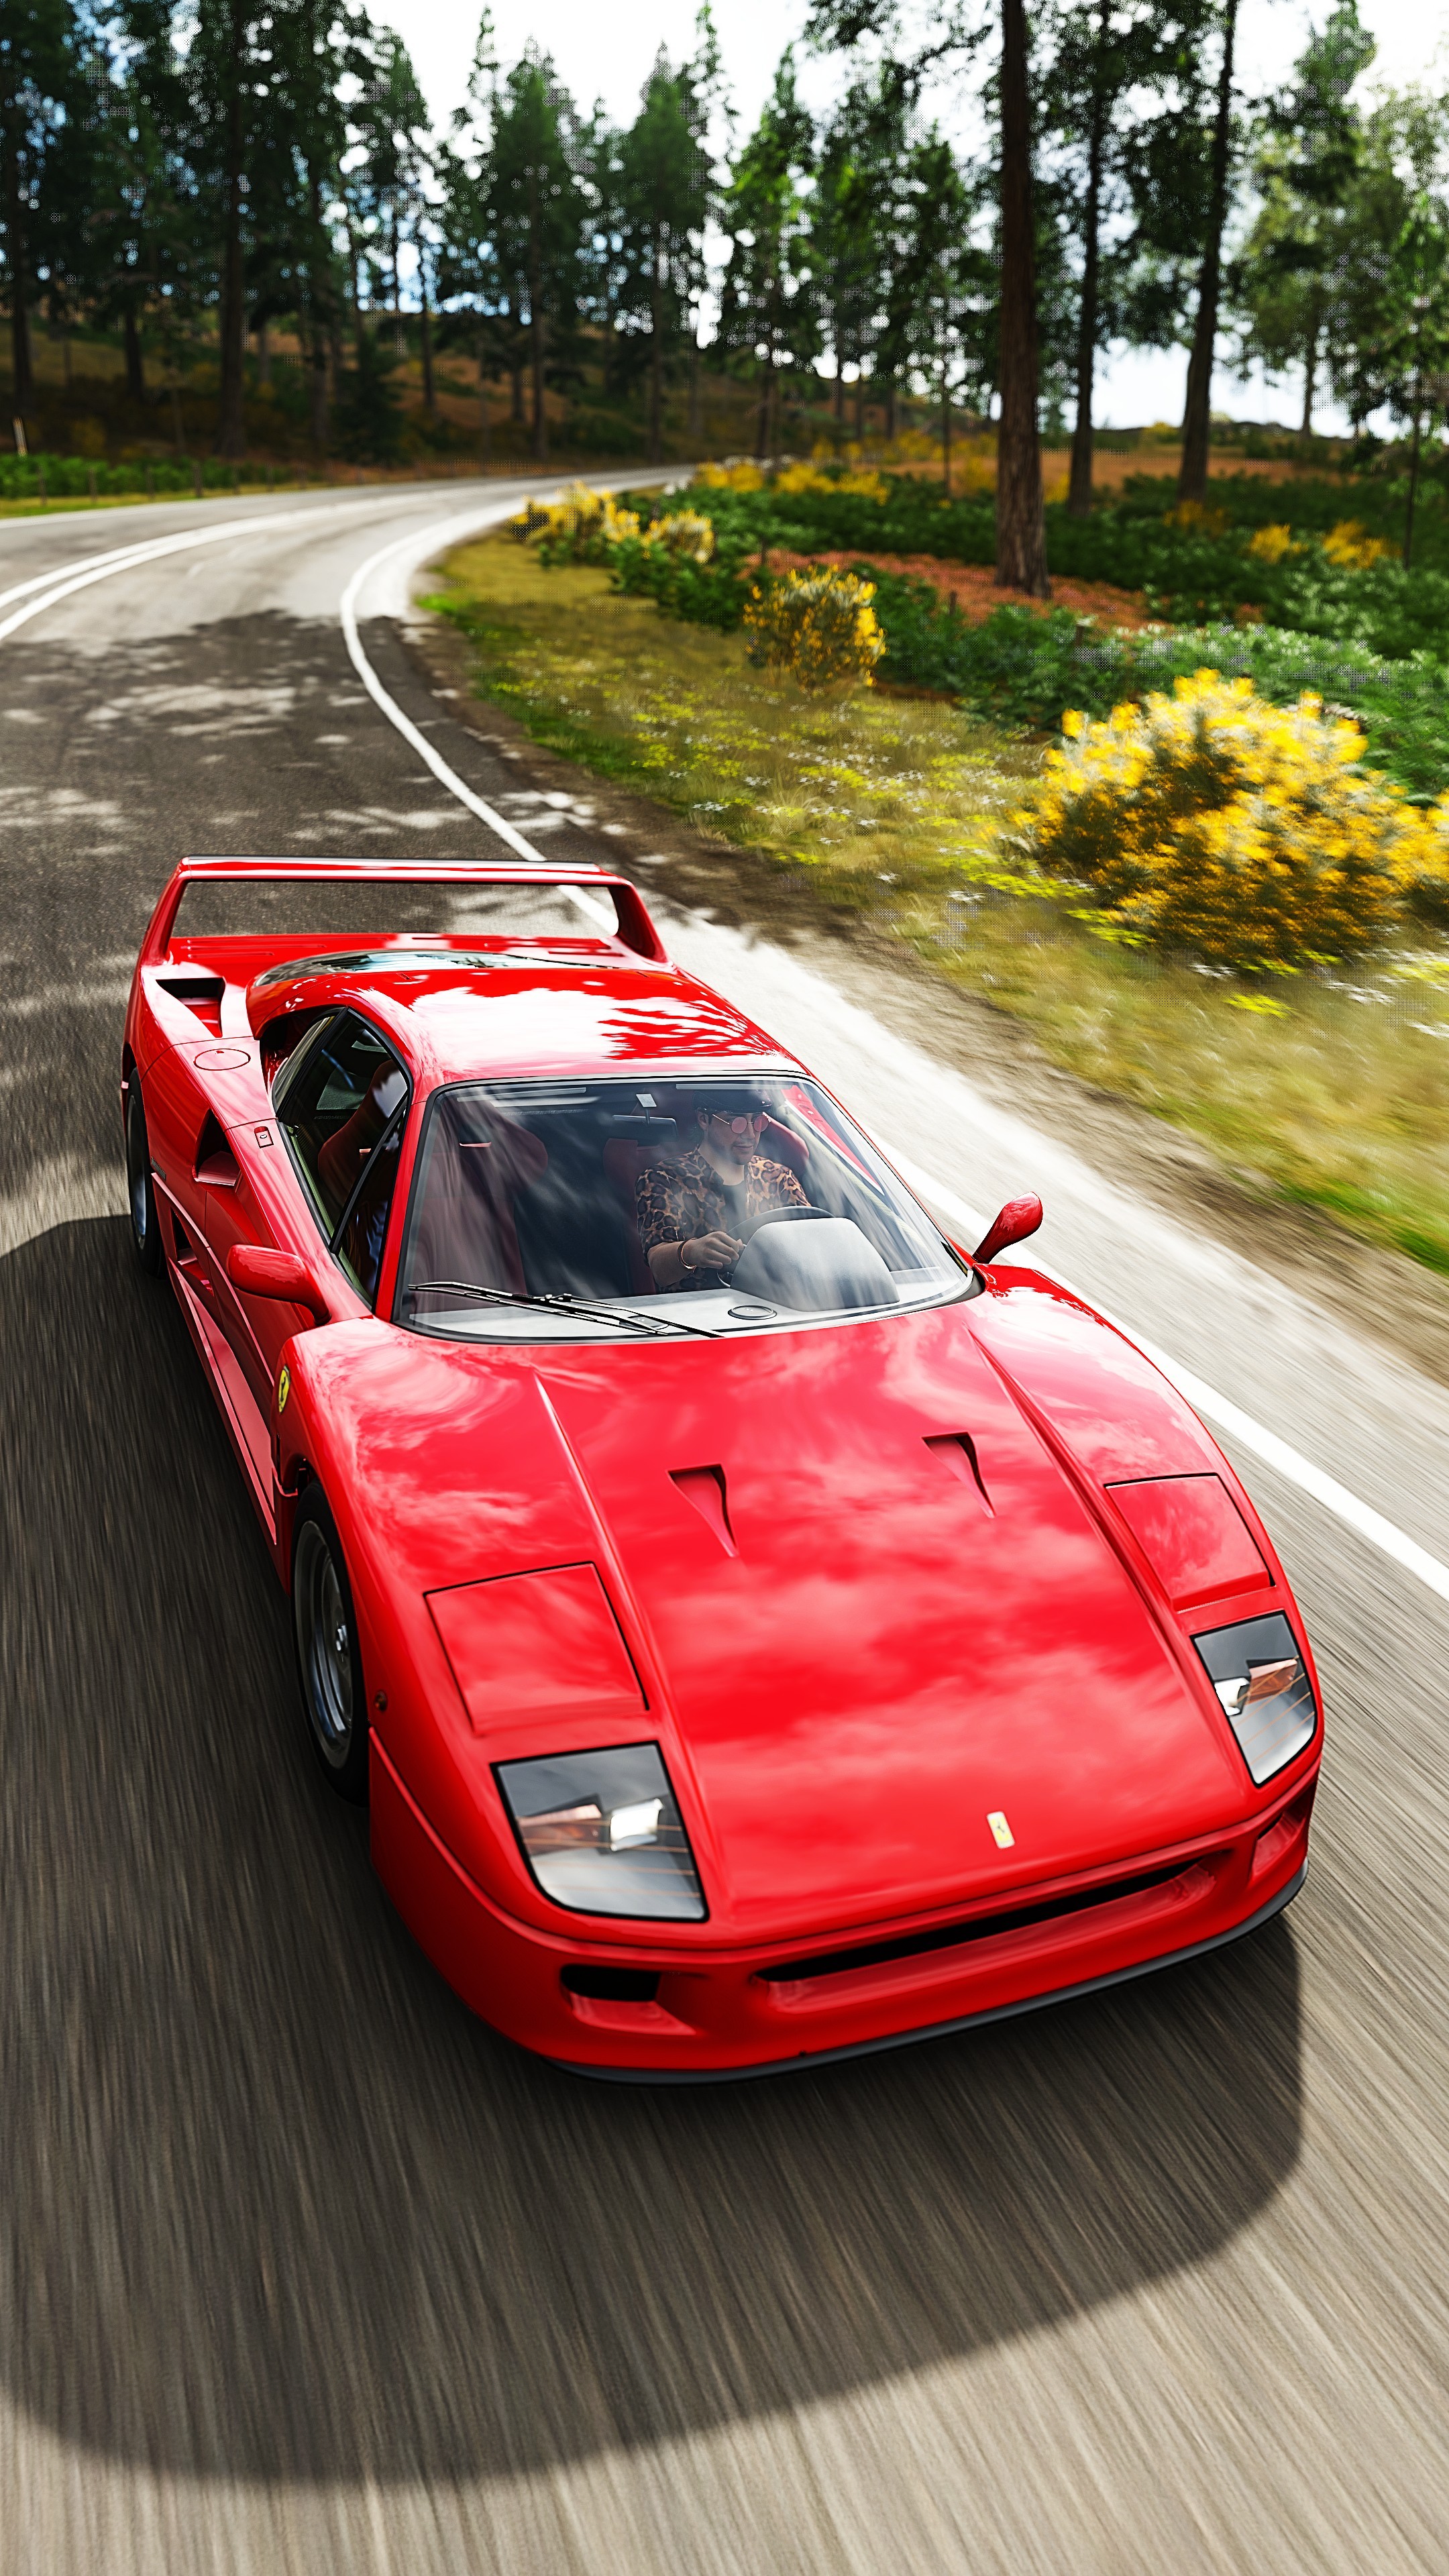 Download These Ferrari Iphone Wallpapers From Forza Now And Thank Us Later Autoevolution